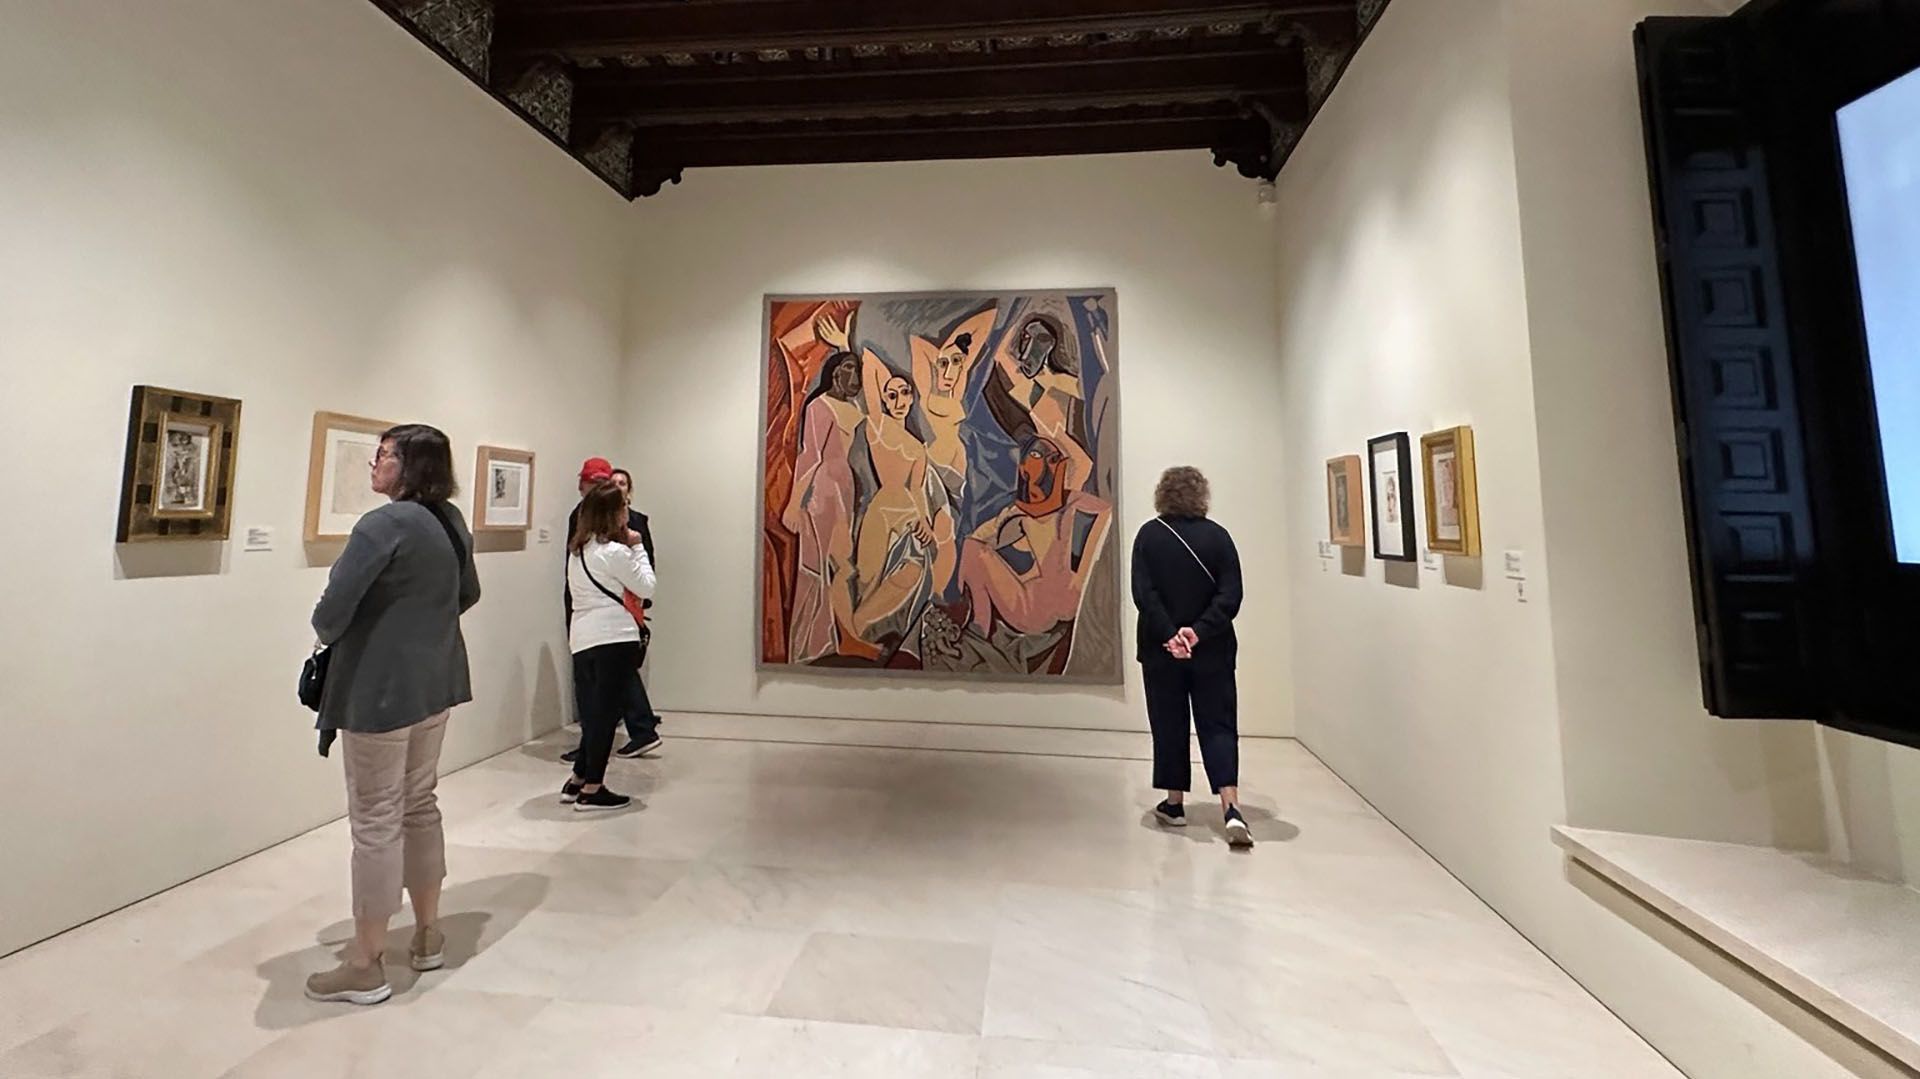 The Museo Picasso Málaga closed its doors after a 9-month conflict with its workers (IG / museopicassomalaga)